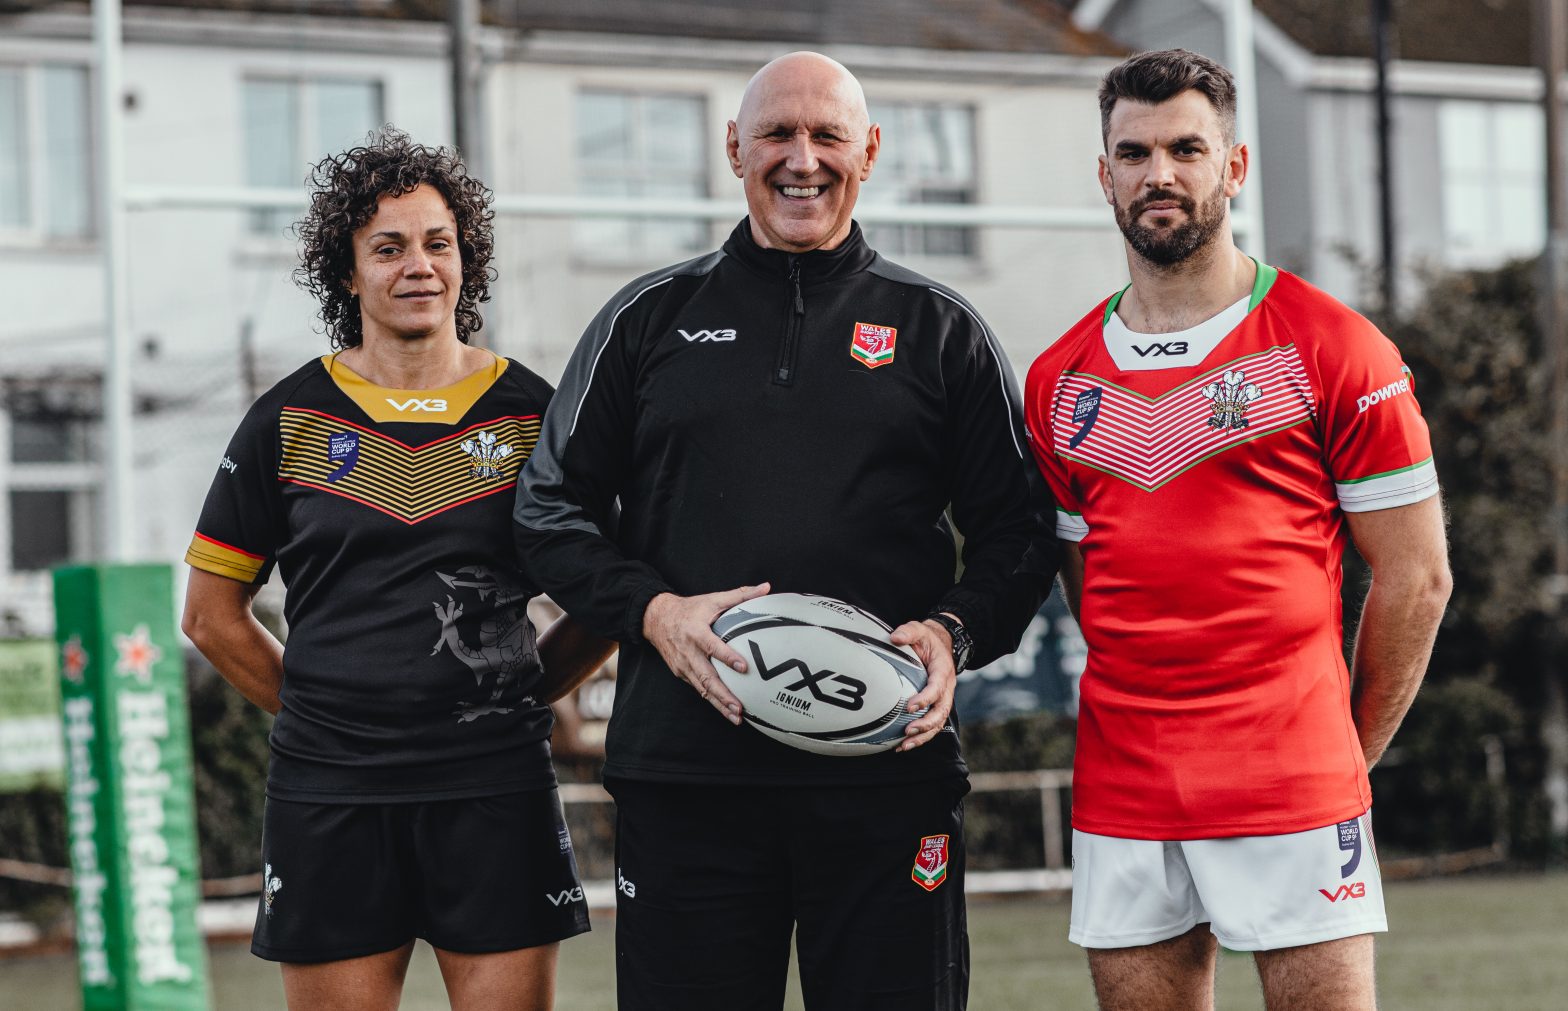 Wales Rugby League partner with VX3 and parent company Lovell Rugby